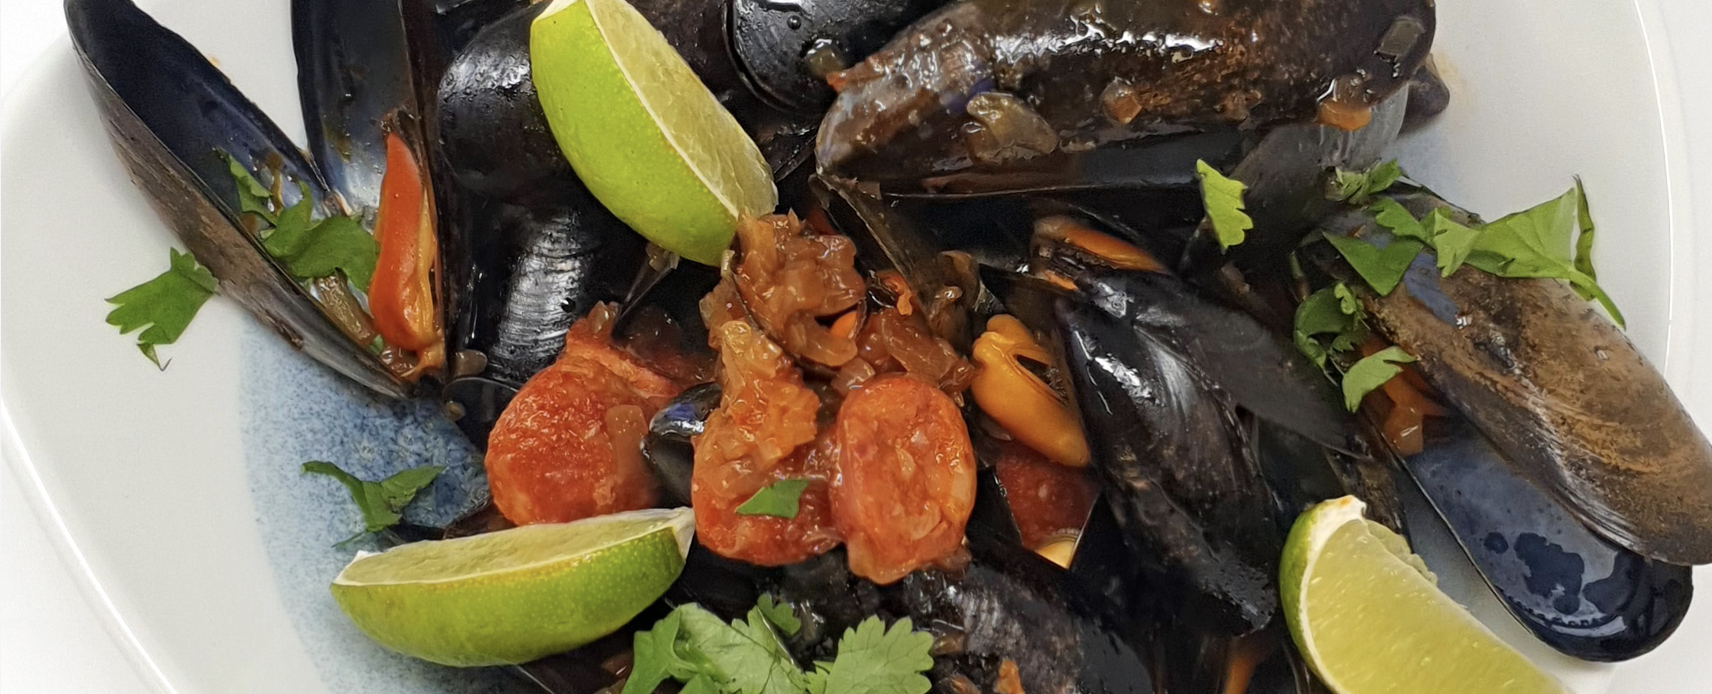 Mussels with rose harissa dish